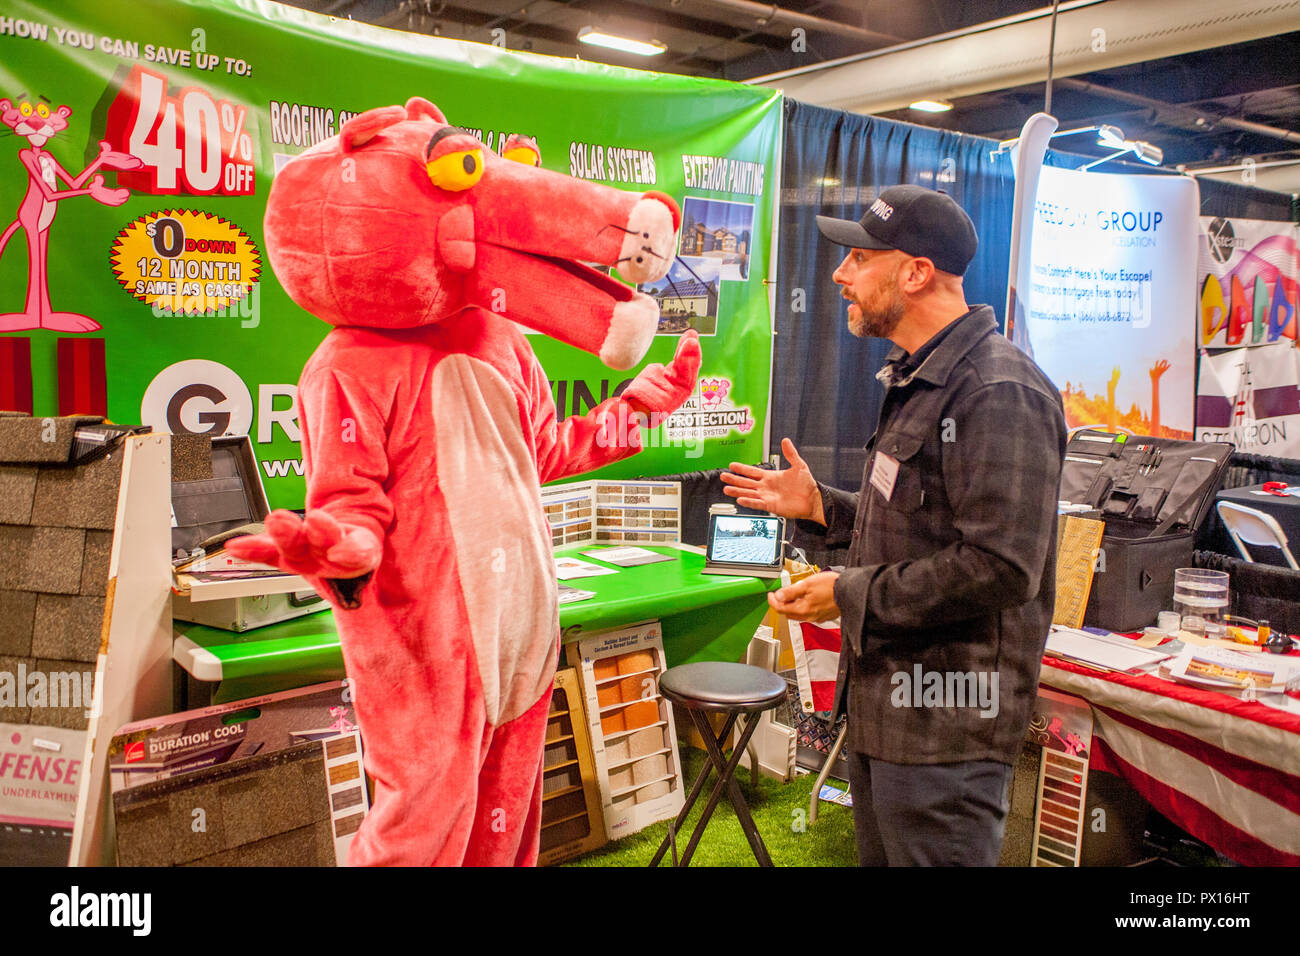 A costumed Pink Panther livens up a contractor's display at a home improvement exhibition in Costa Mesa, CA Stock Photo